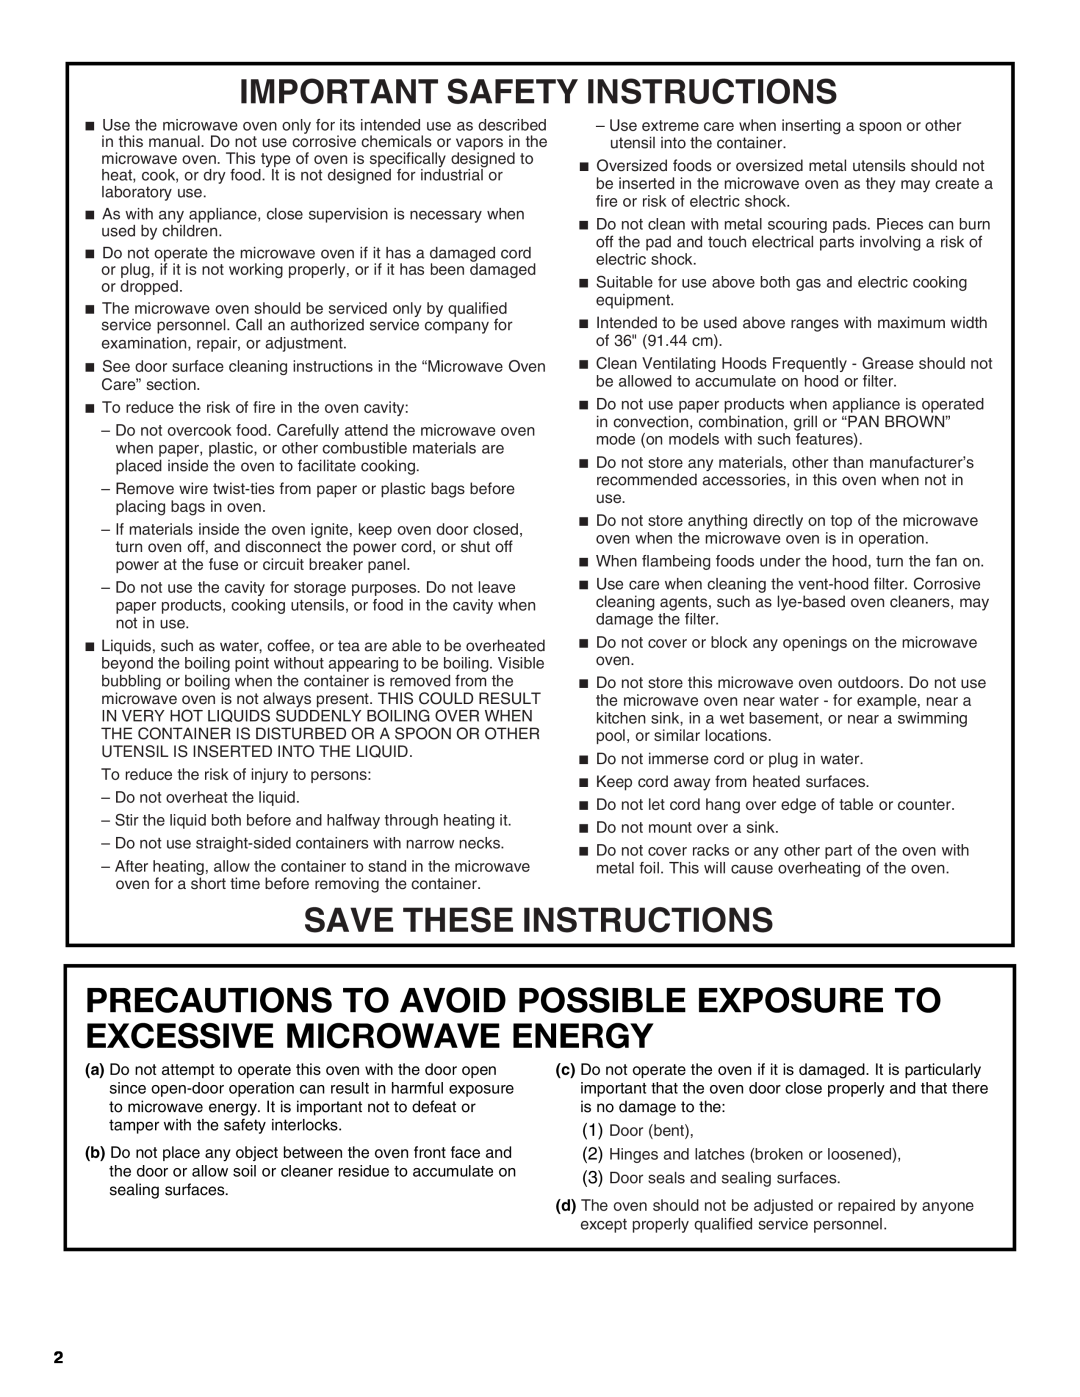 Maytag W10336691A Precautions To Avoid Possible Exposure To Excessive Microwave Energy, Important Safety Instructions 